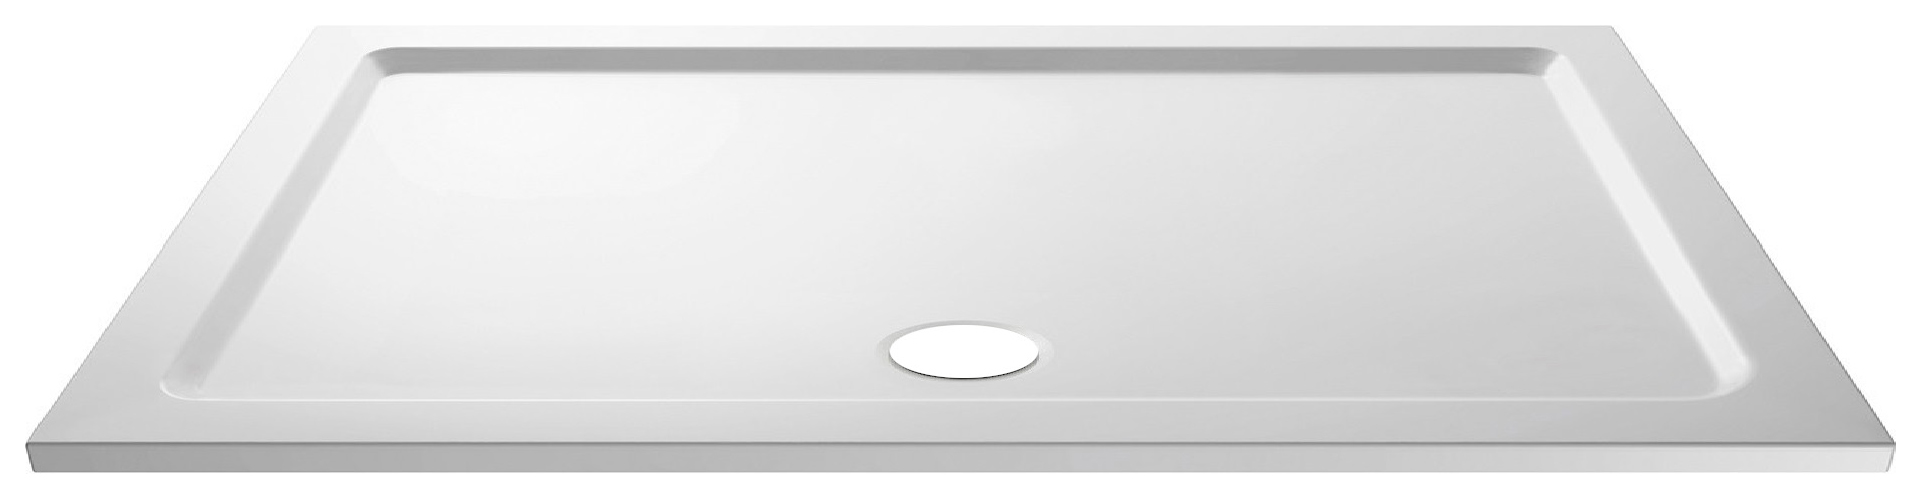 Image of Wickes 40mm Pearlstone Rectangular Shower Tray - 1500 x 900mm